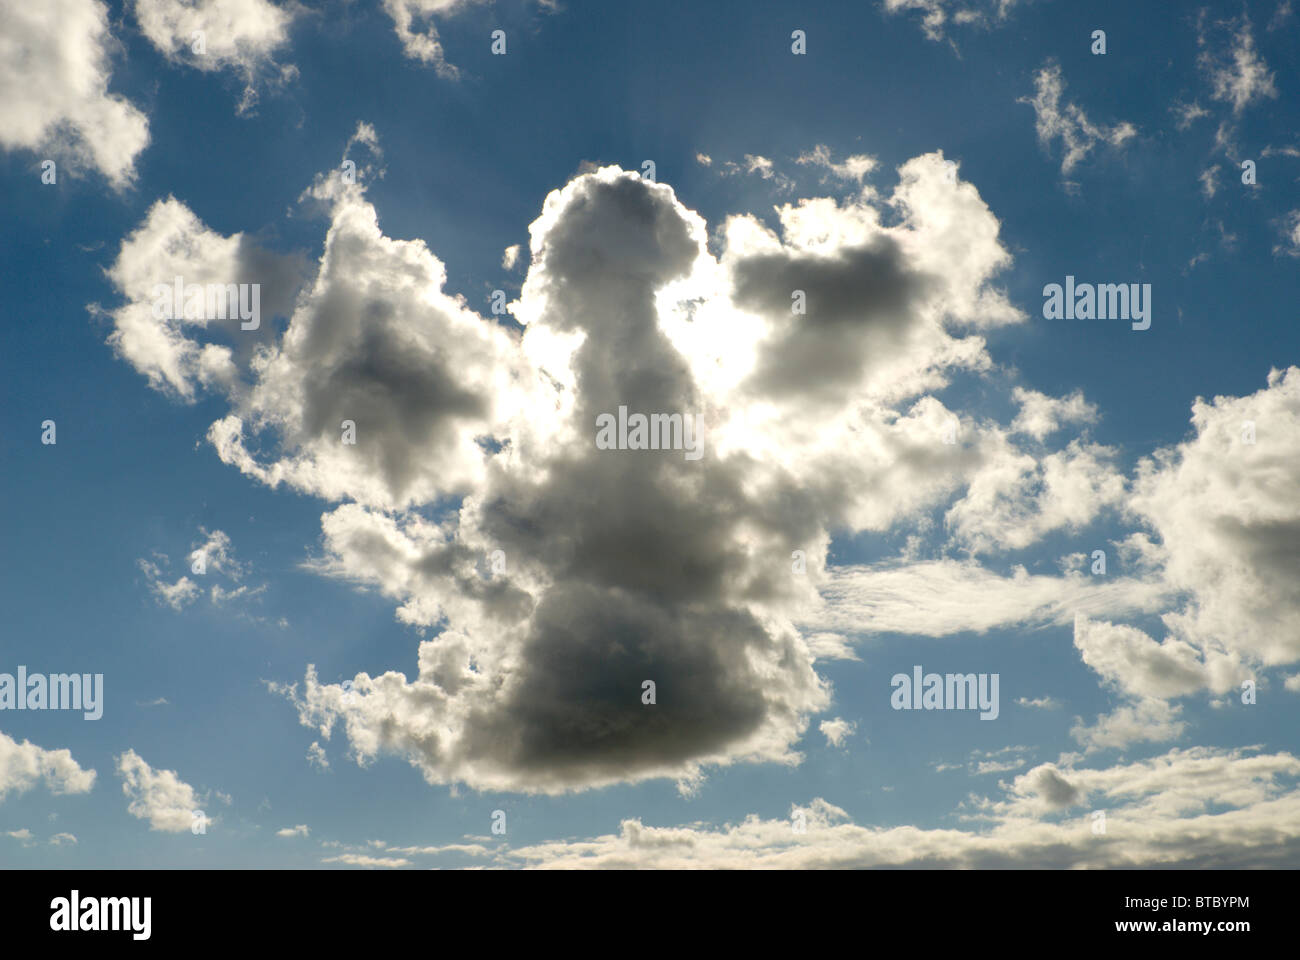 Cloud formation in the shape of an Angel or a map of the UK with sunlight behind Stock Photo